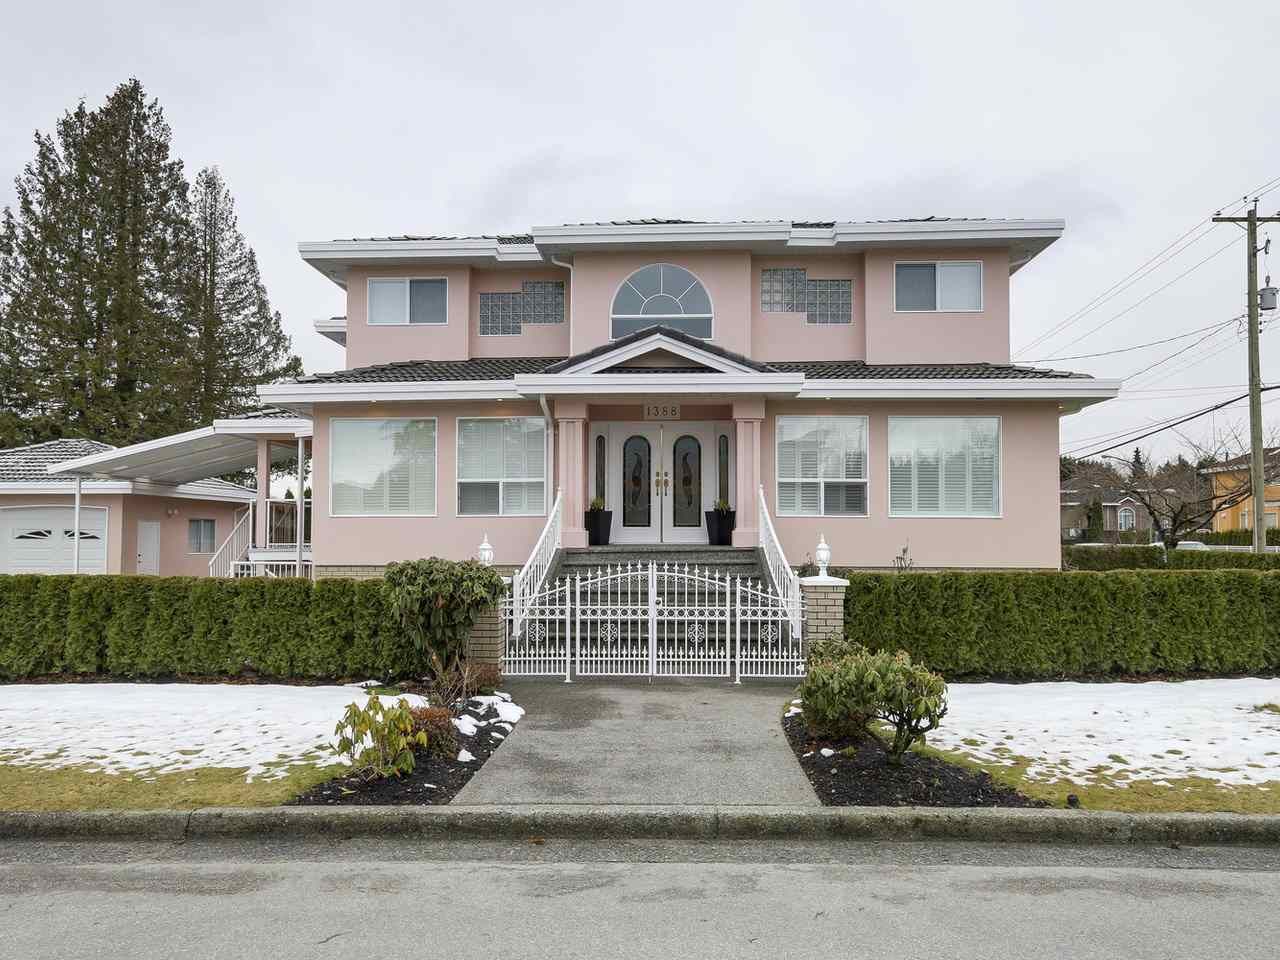 Photo 17: Photos: 1388 BLAINE Drive in Burnaby: Sperling-Duthie House for sale (Burnaby North)  : MLS®# R2146220